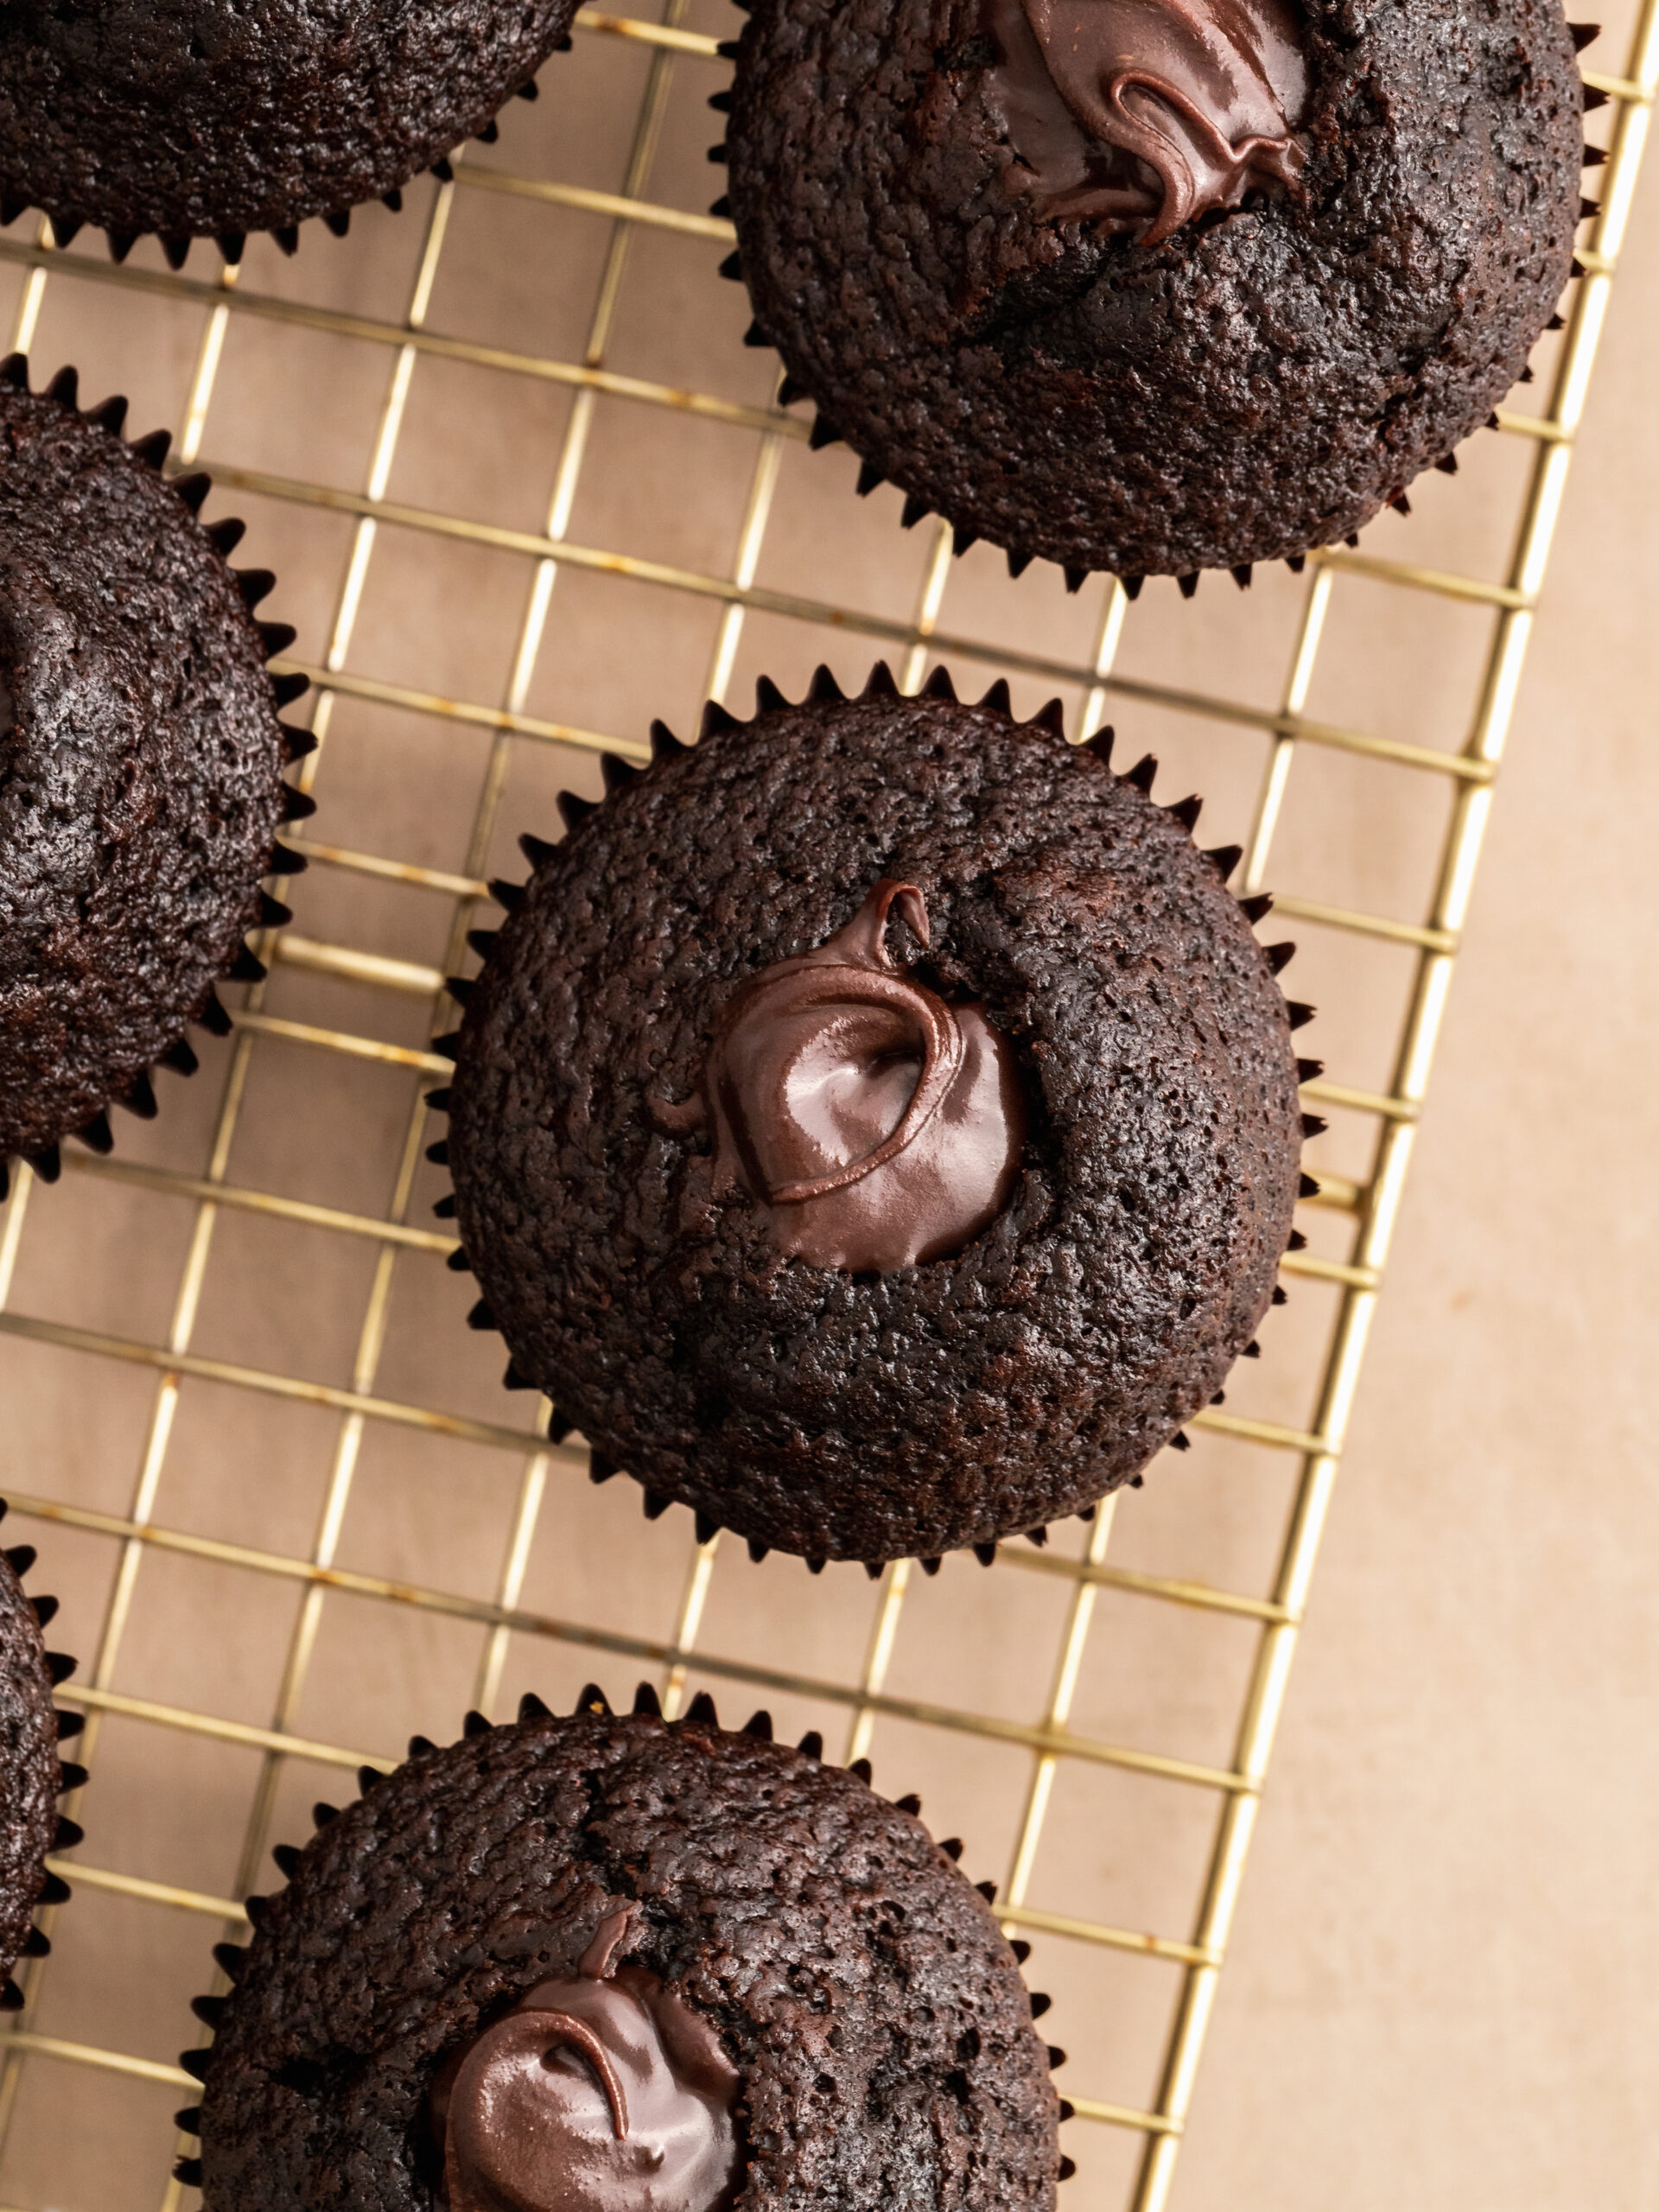 Dig out the core of the cupcakes and filled with hot fudge sauce.